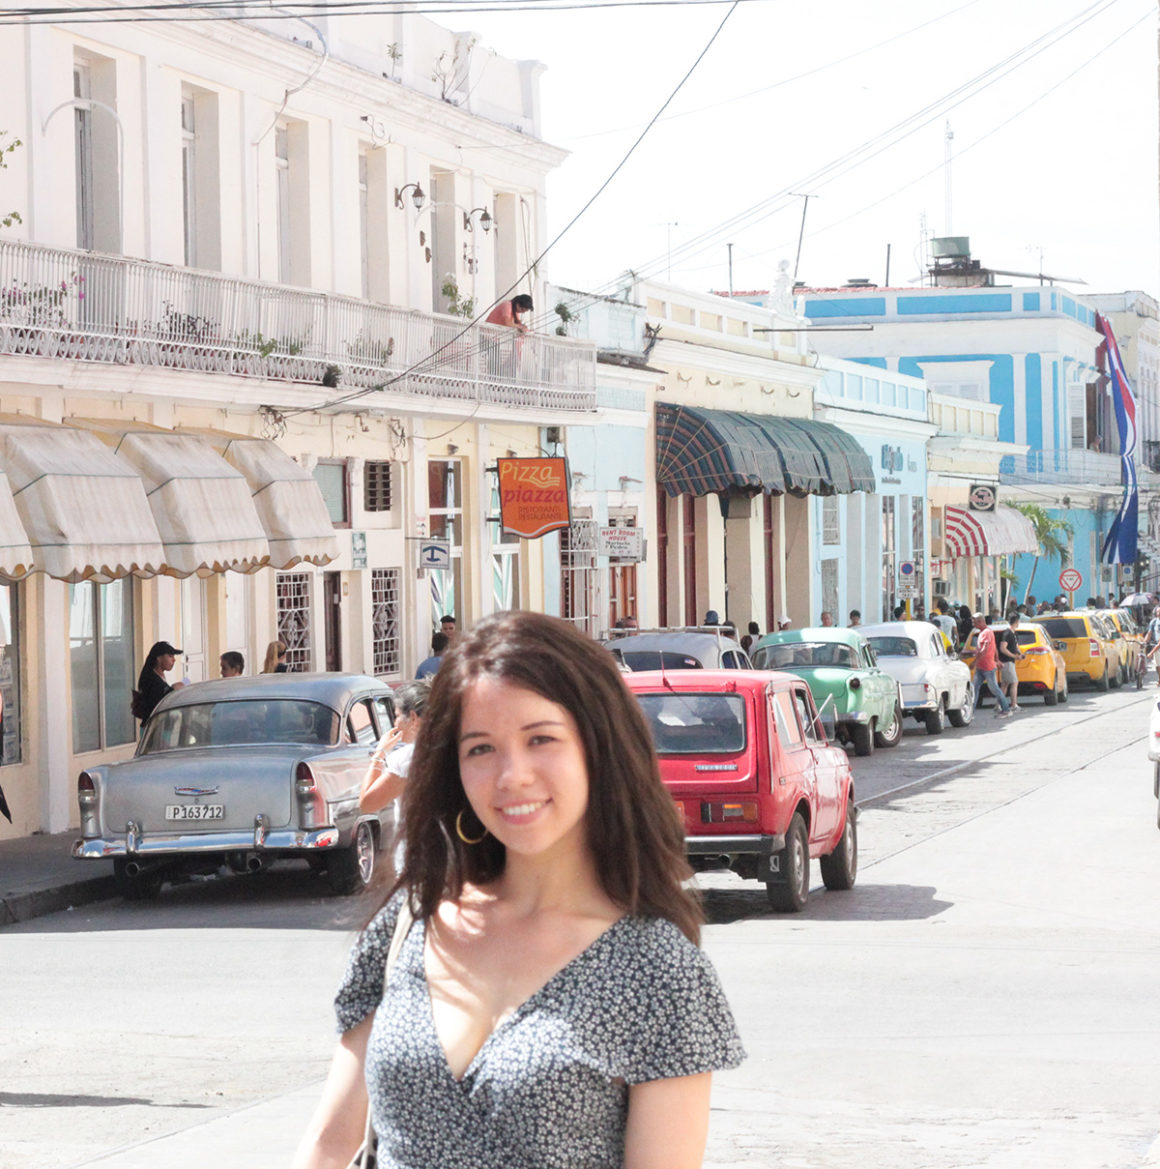 One day or one night in Cienfuegos - things to do in Cuba